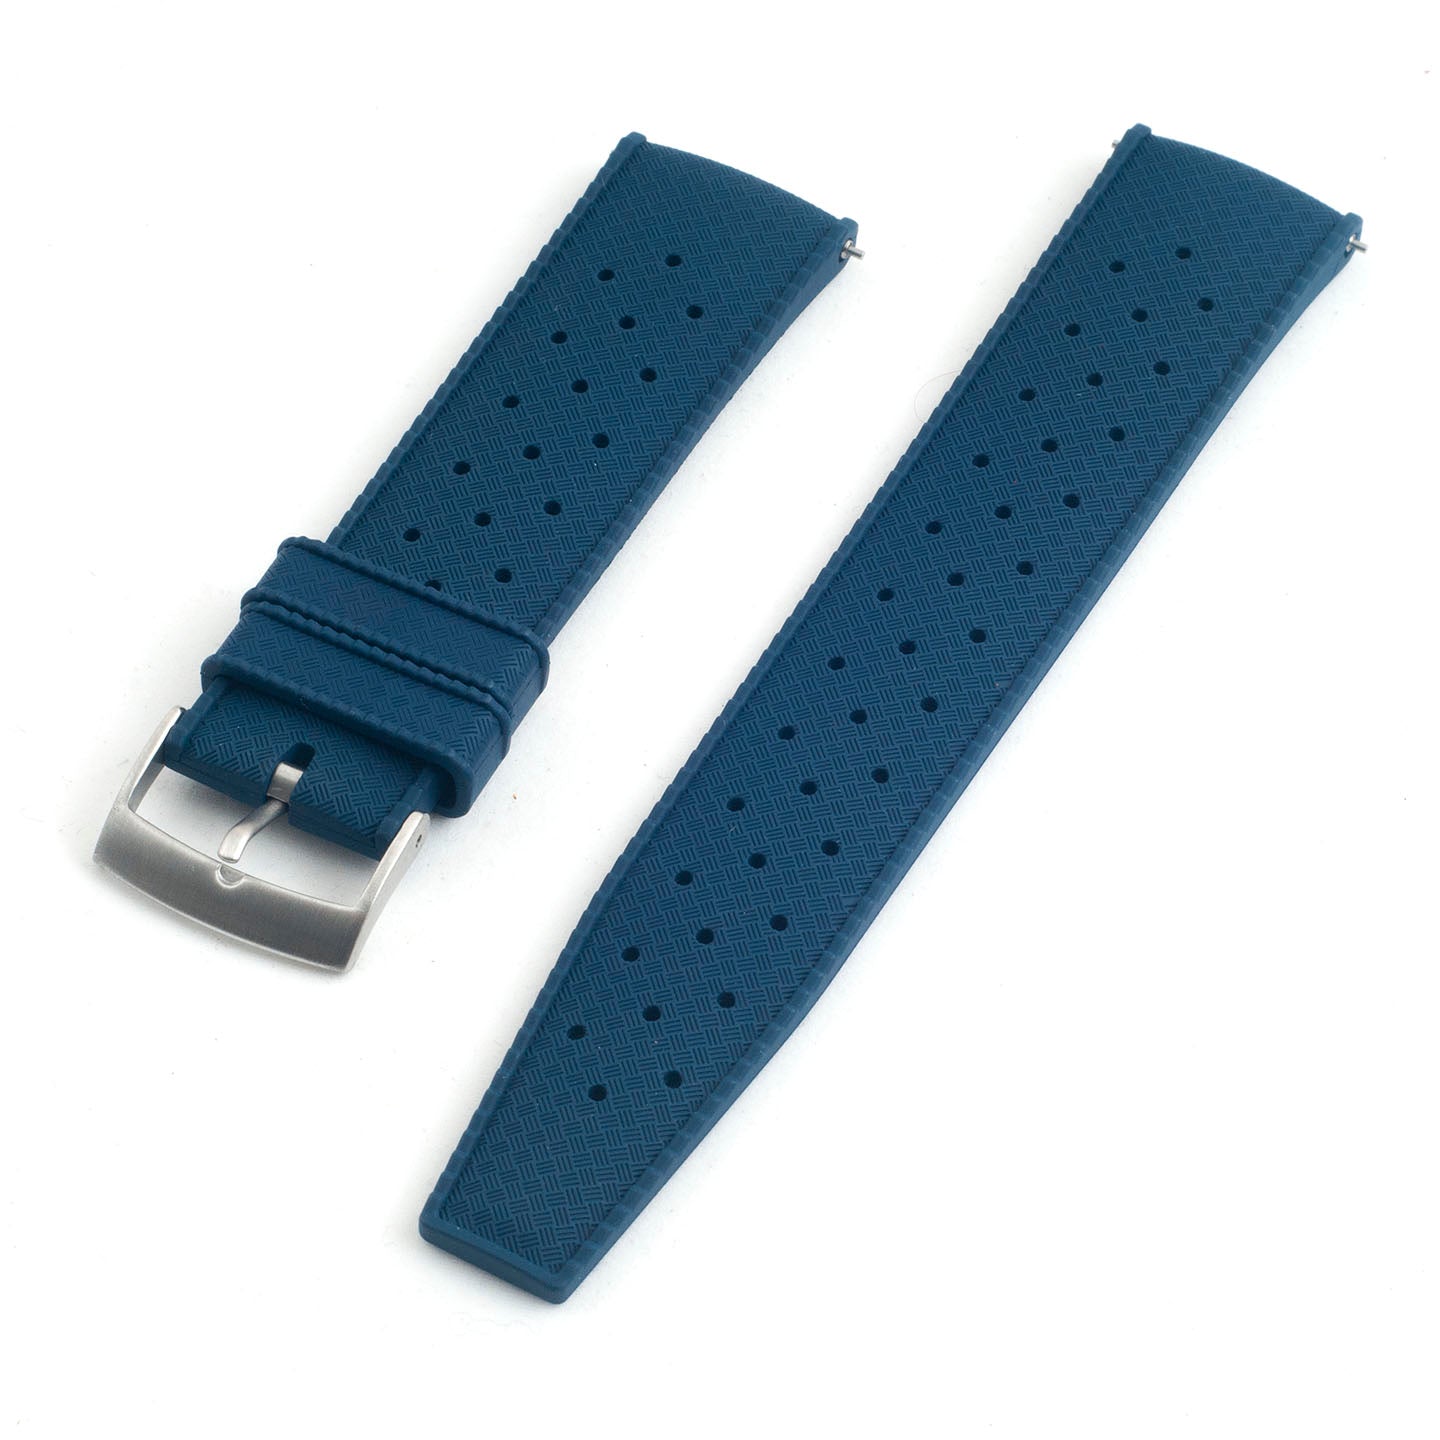 Tropical retro vintage replacement watch strap band FKM rubber tropic 19mm 20mm 21mm 22mm blue